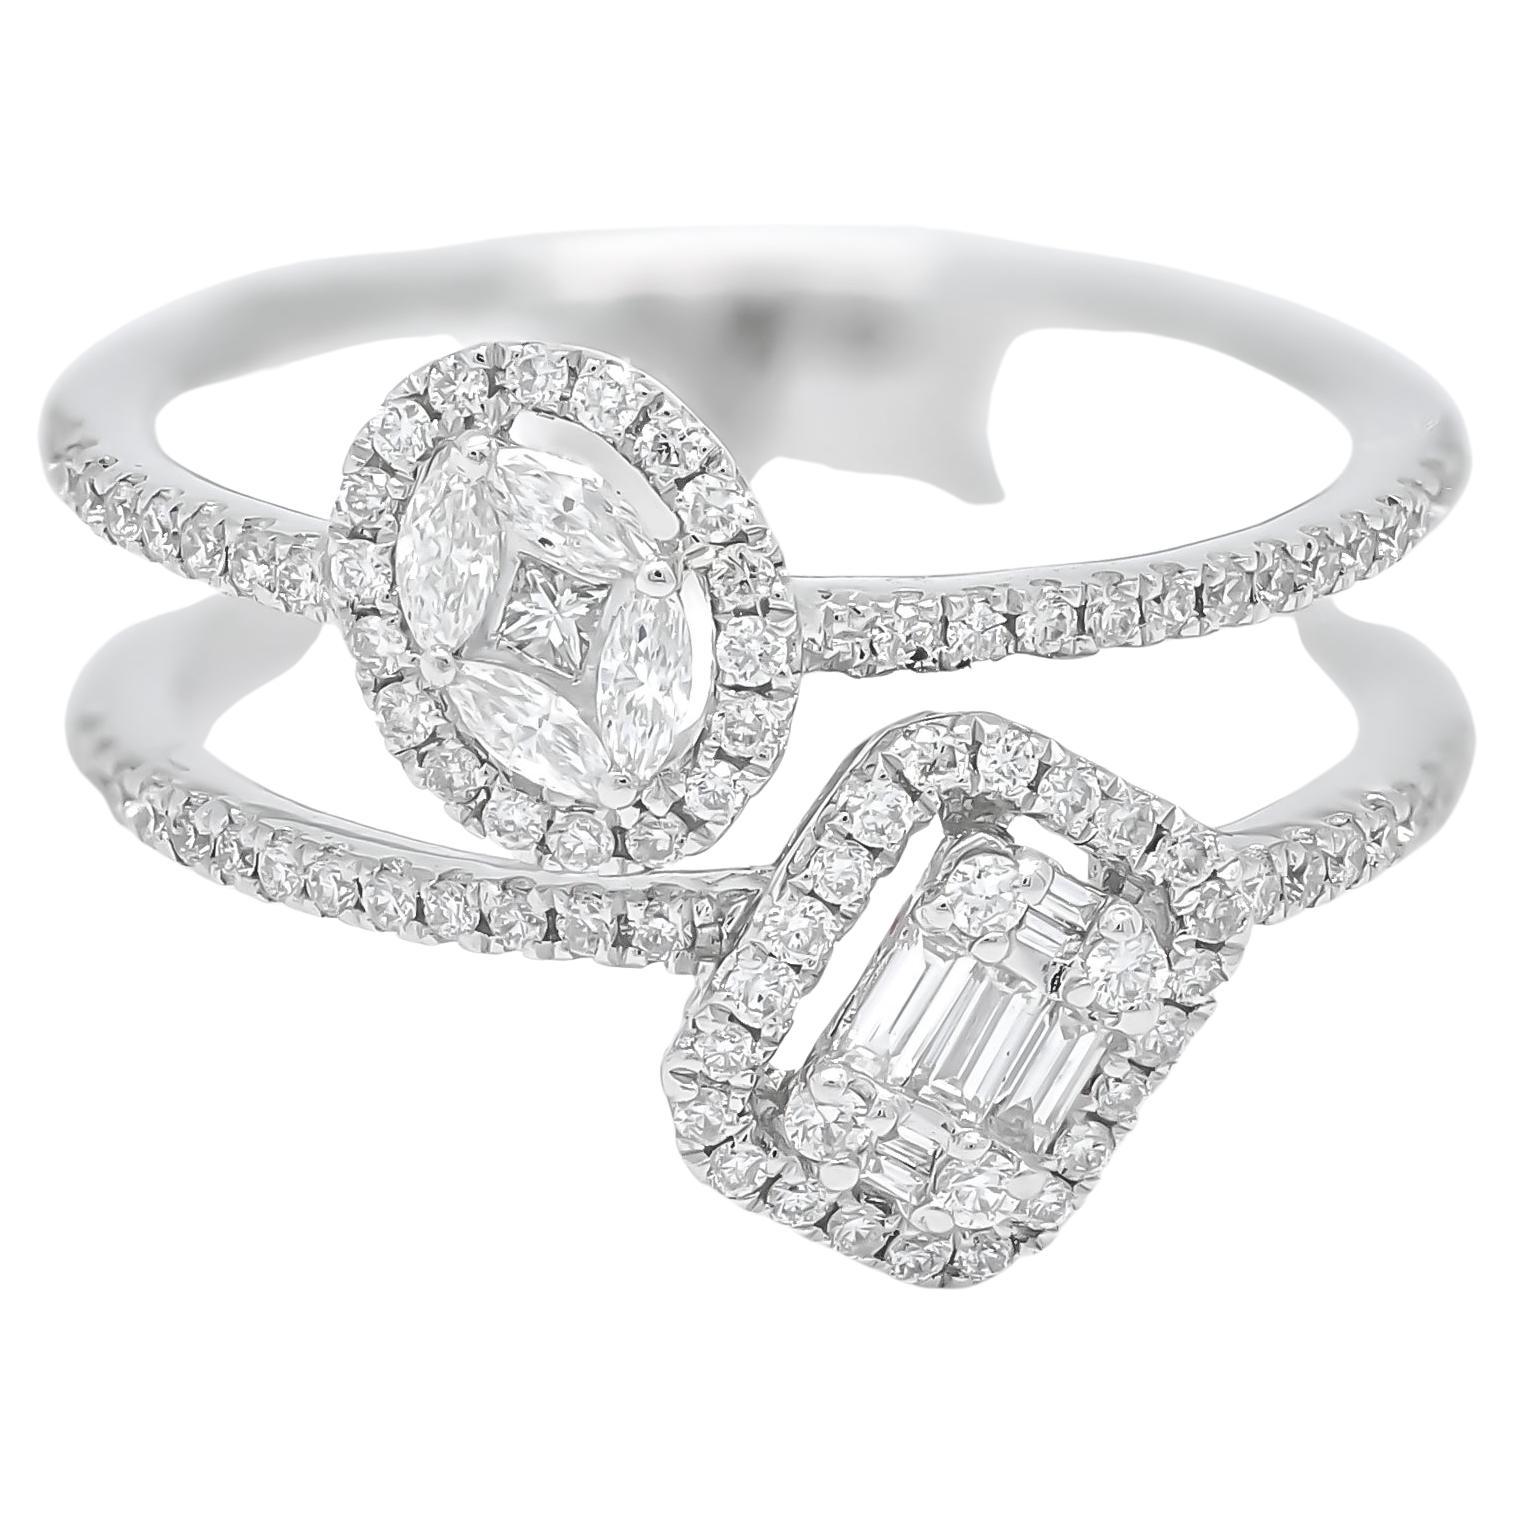 Beautifully Created for any occasion.

Astounding elegance and astonishing shine emanate from every facet of this incredibly beautiful. Fashioned in a fabulous 2 cluster illusion, this ring incorporates Baguette, Marquise, Princess and round-shape